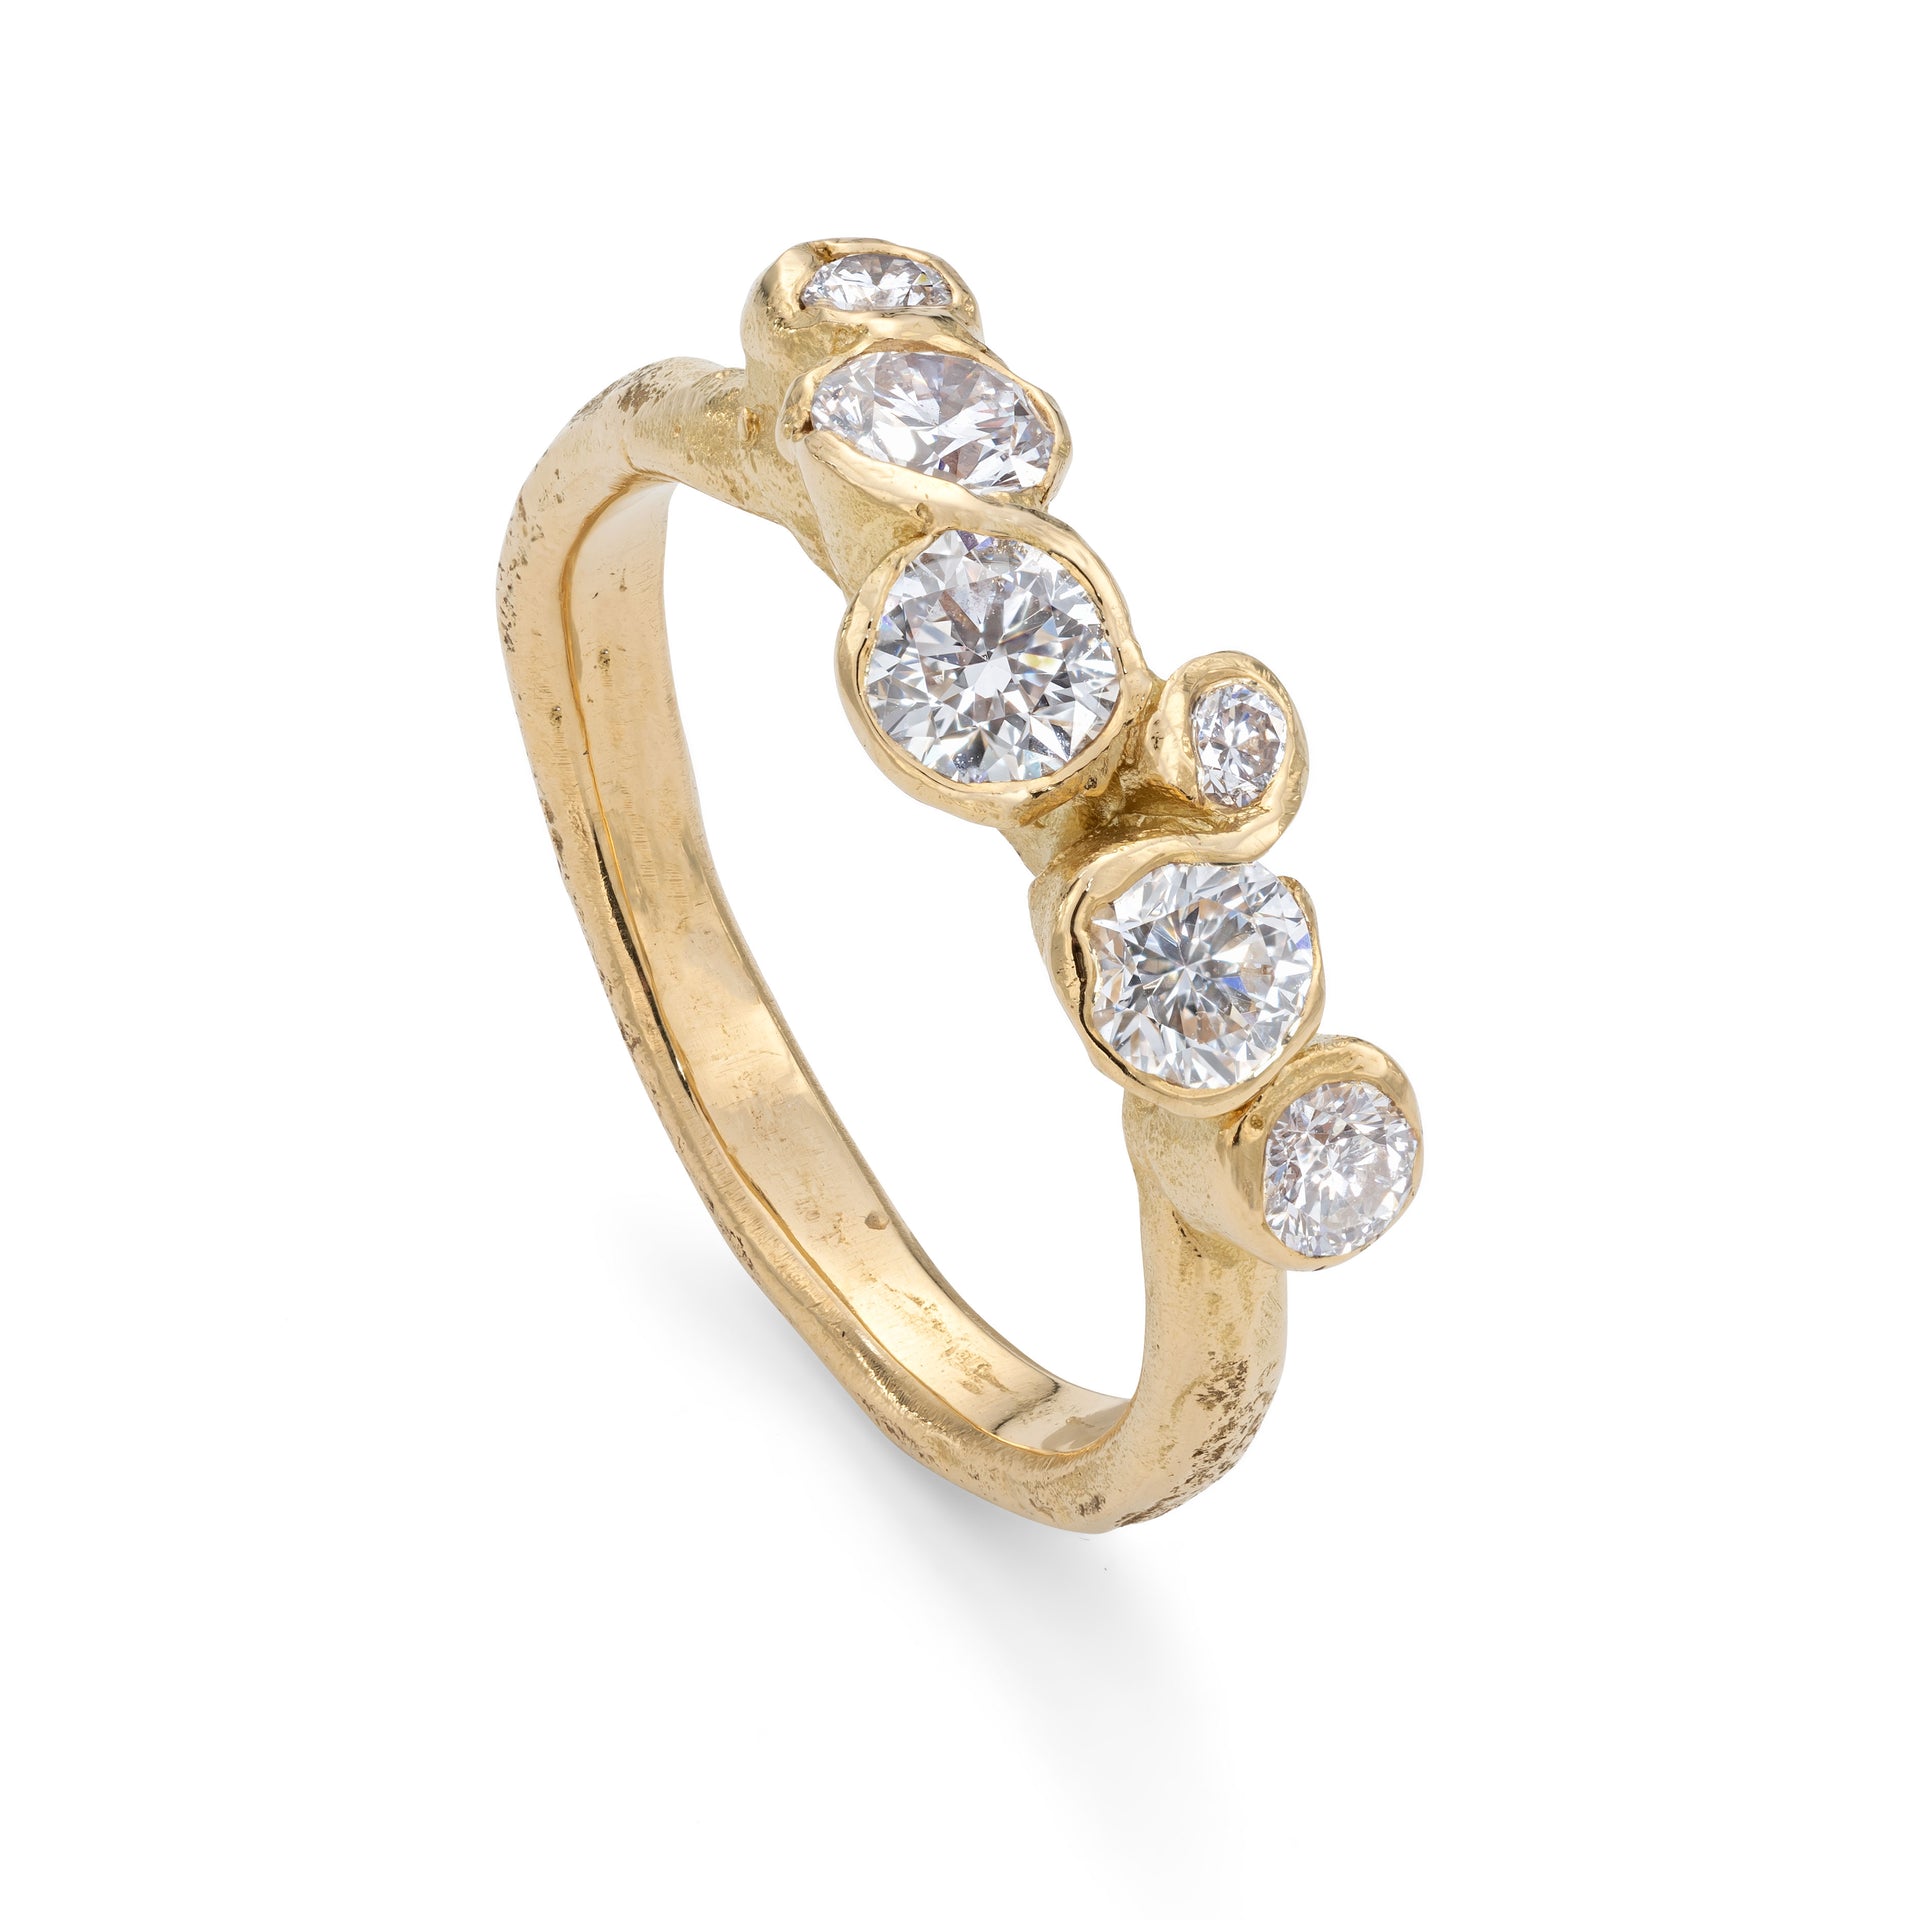 Upright, front view of a diamond and 18ct gold engagement ring. This ring has a sea worn texture and has been organically designed by Emily Nixon.